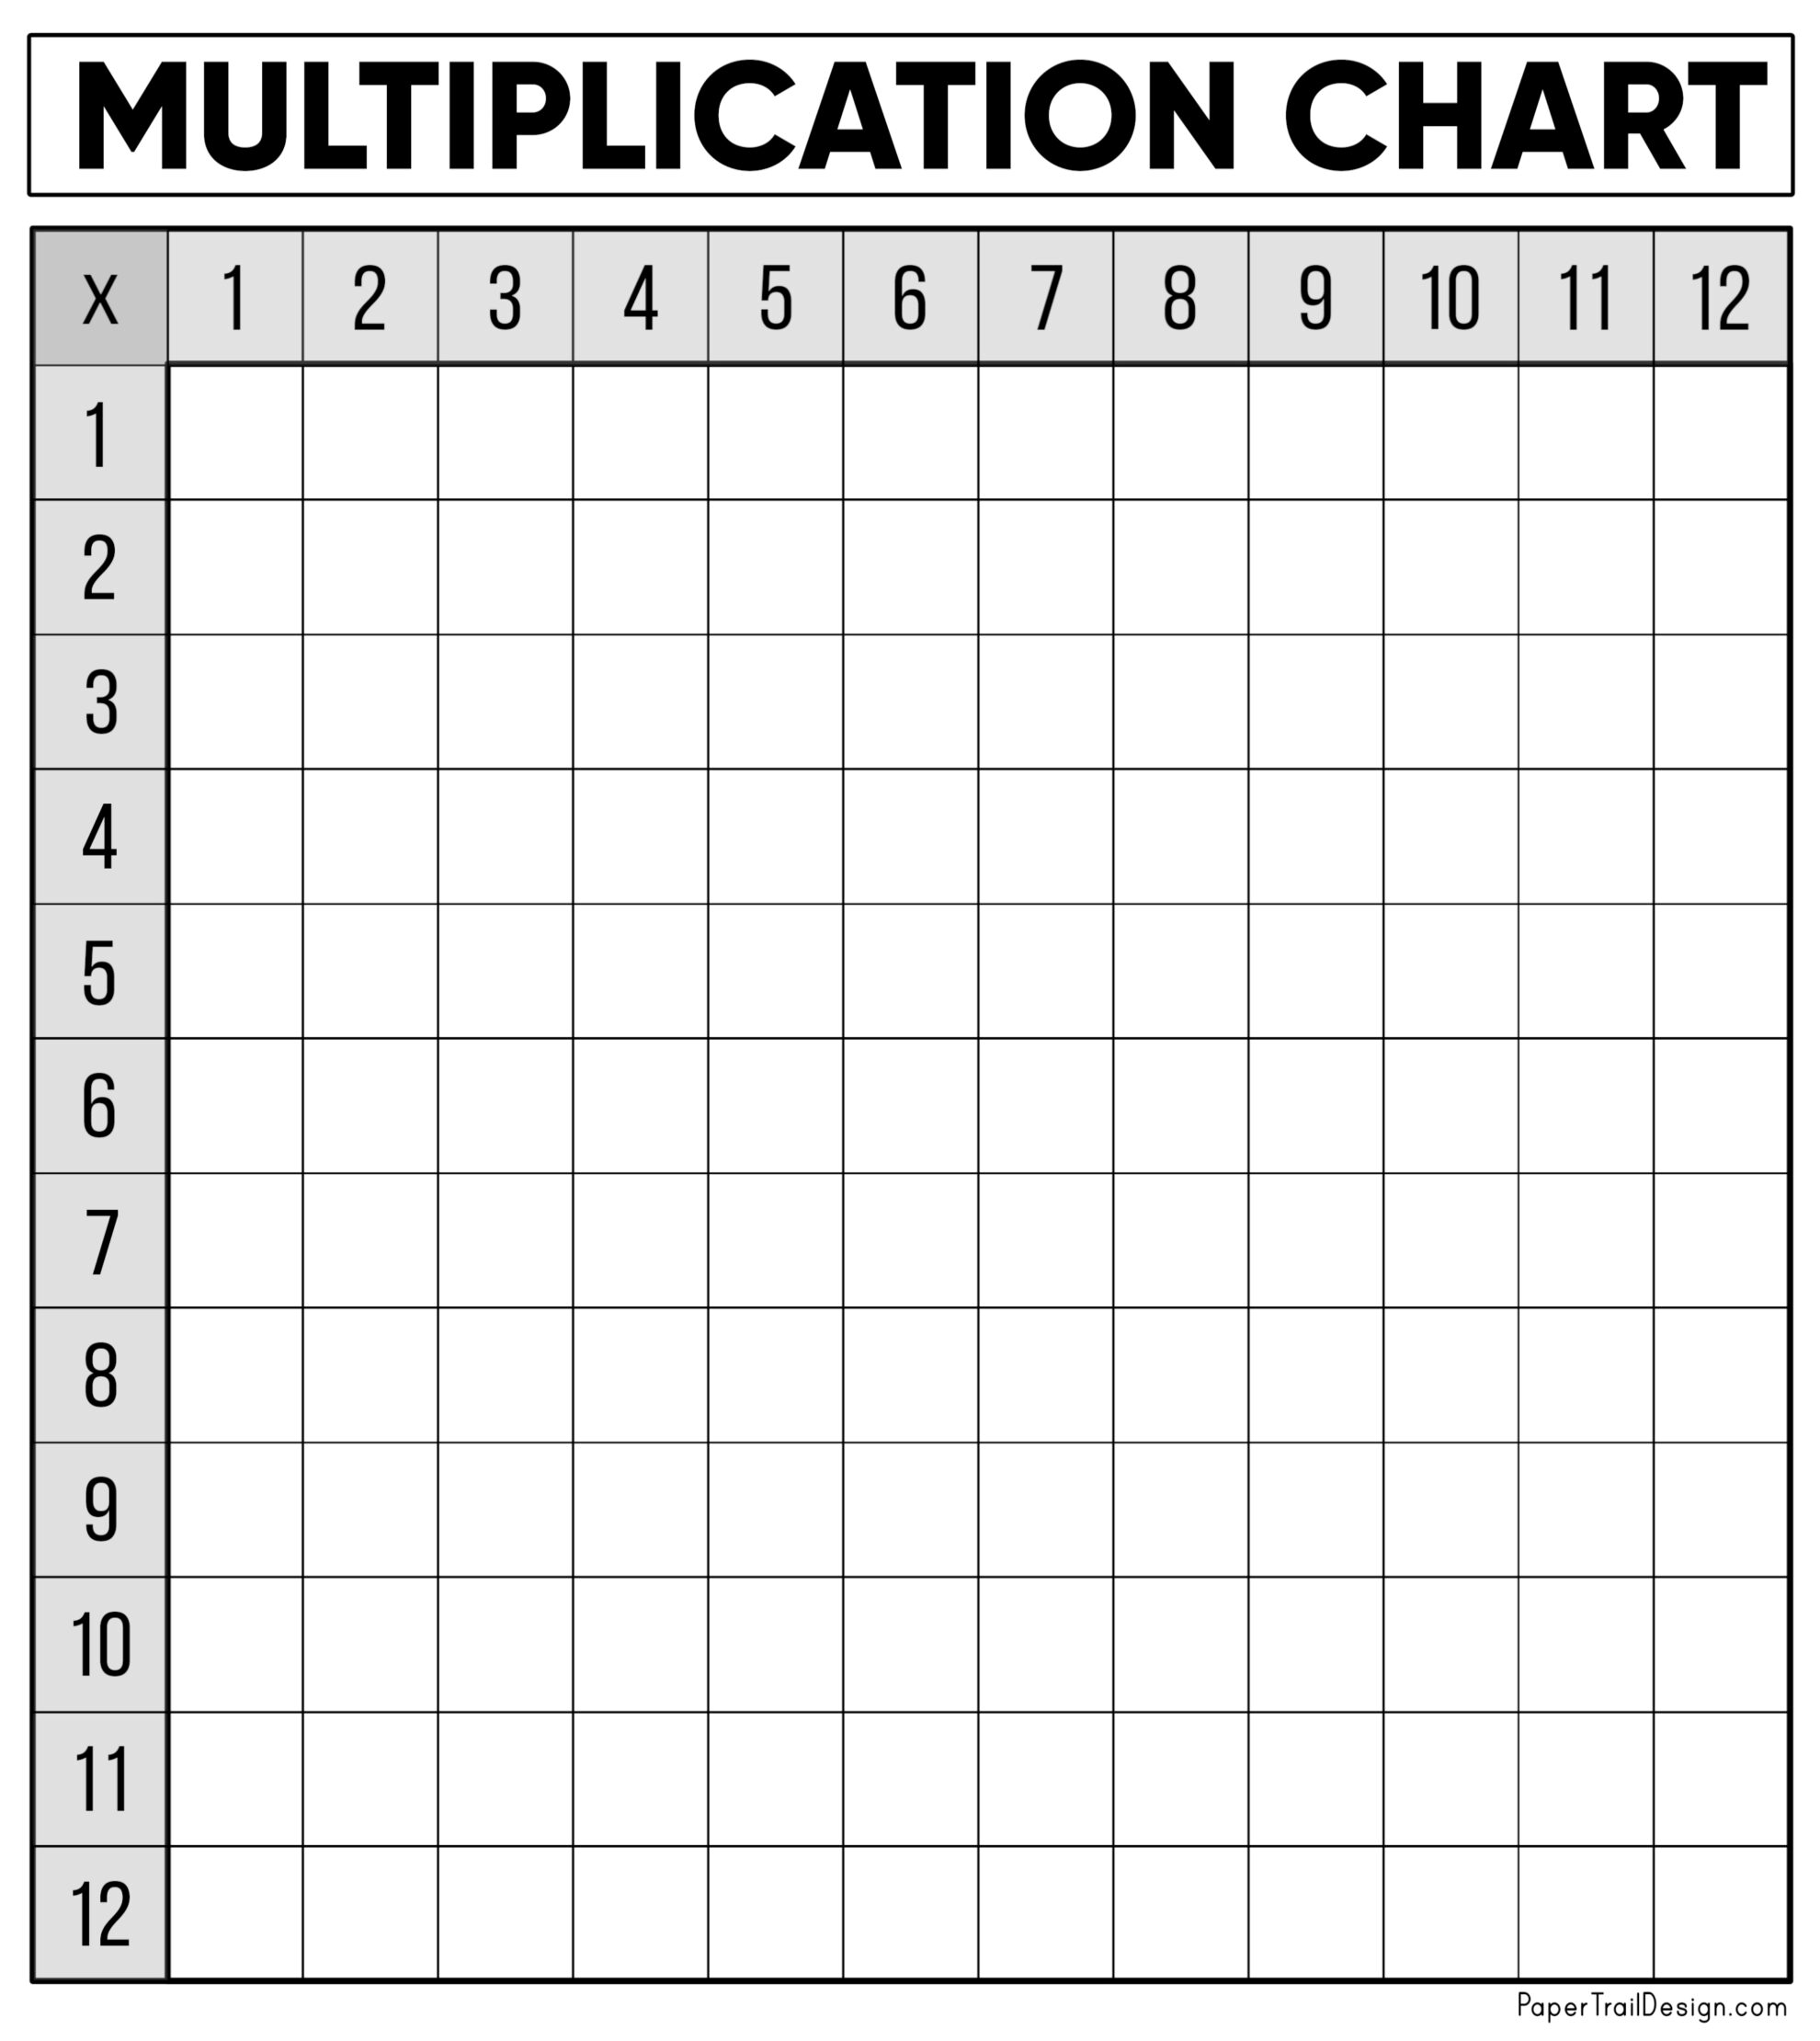 free-multiplication-chart-printable-paper-trail-design-free